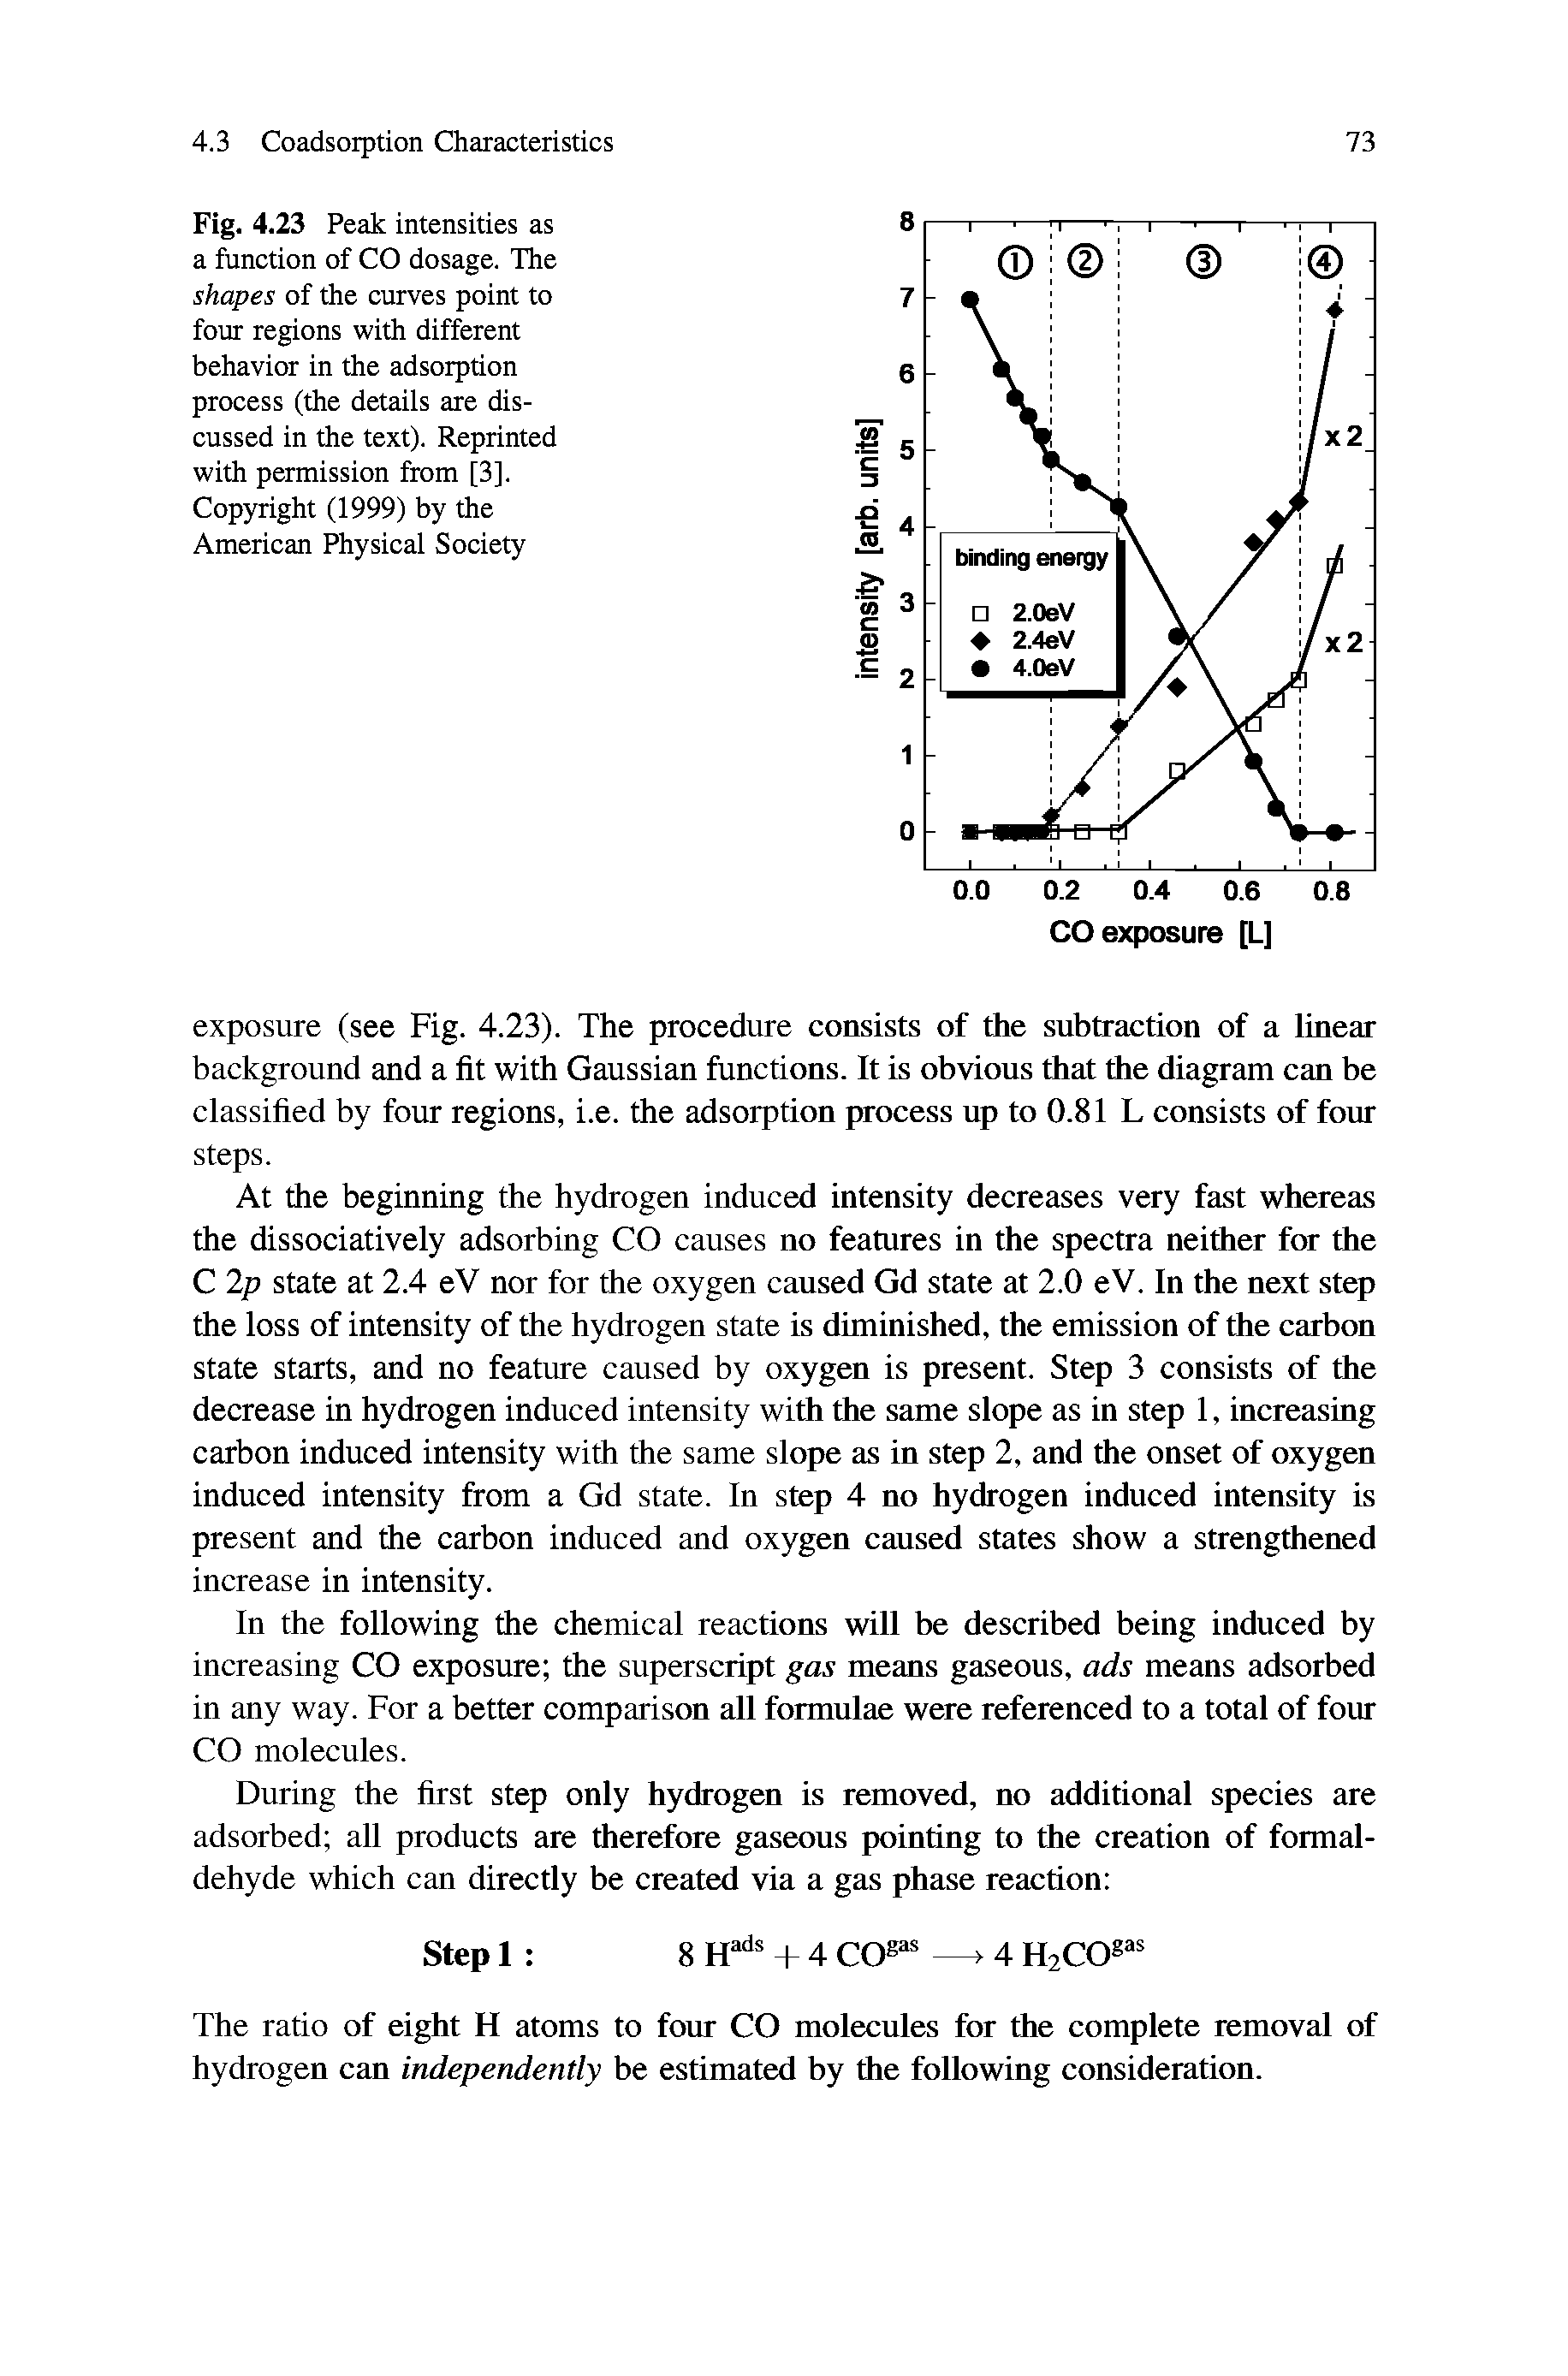 Fig. 4.23 Peak intensities as a function of CO dosage. The shapes of the curves point to four regions with different behavior in the adsorption process (the details are discussed in the text). Reprinted with permission from [3]. Copyright (1999) by the American Physical Society...